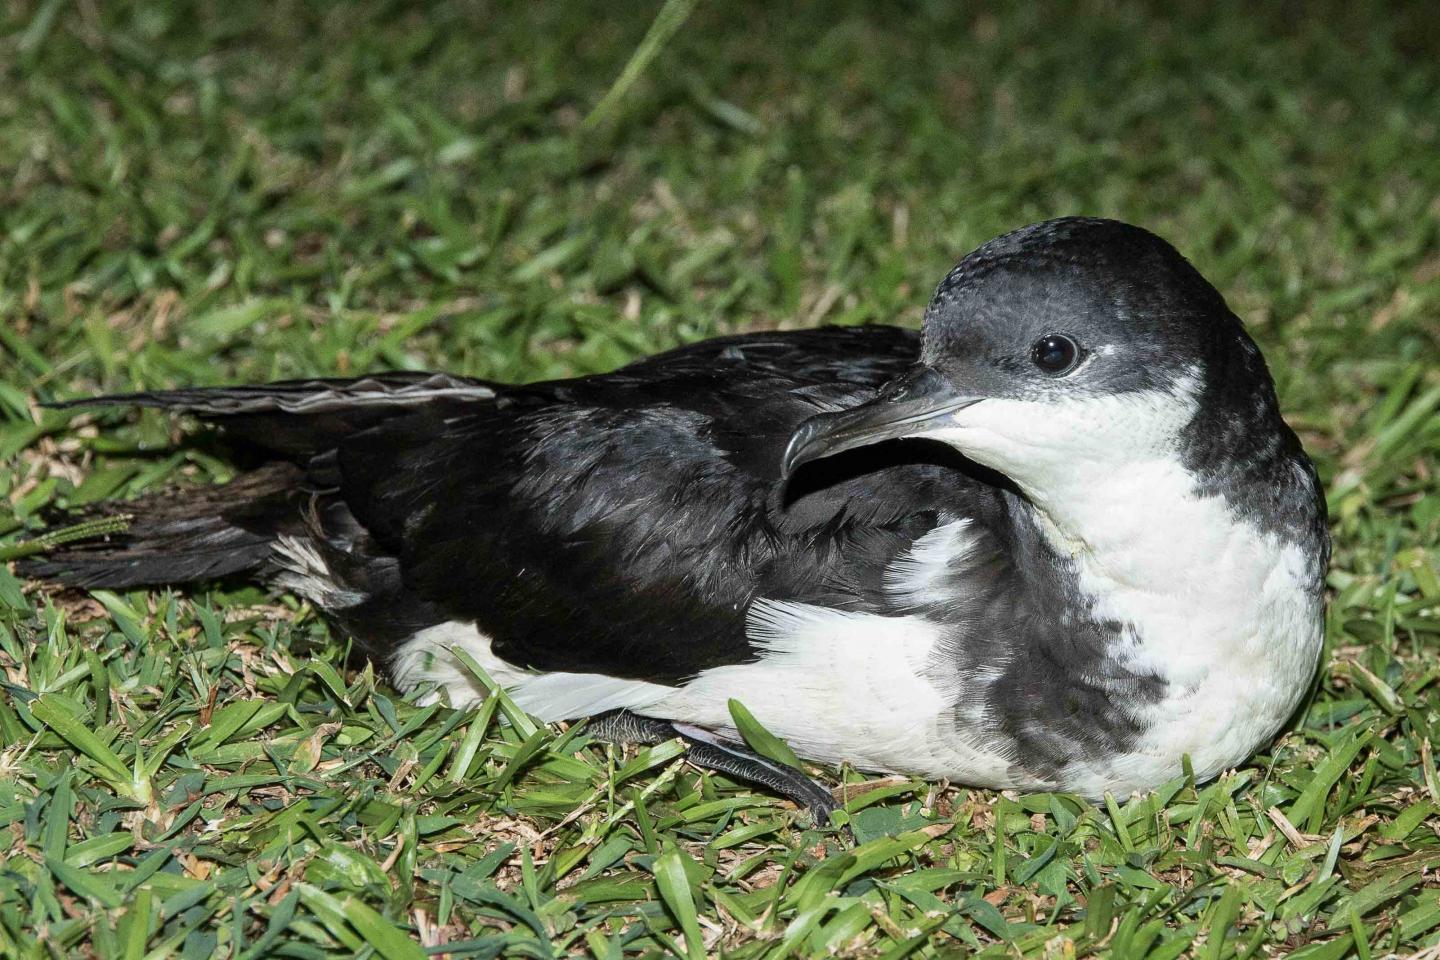 Juvenile Newell's Shearwater